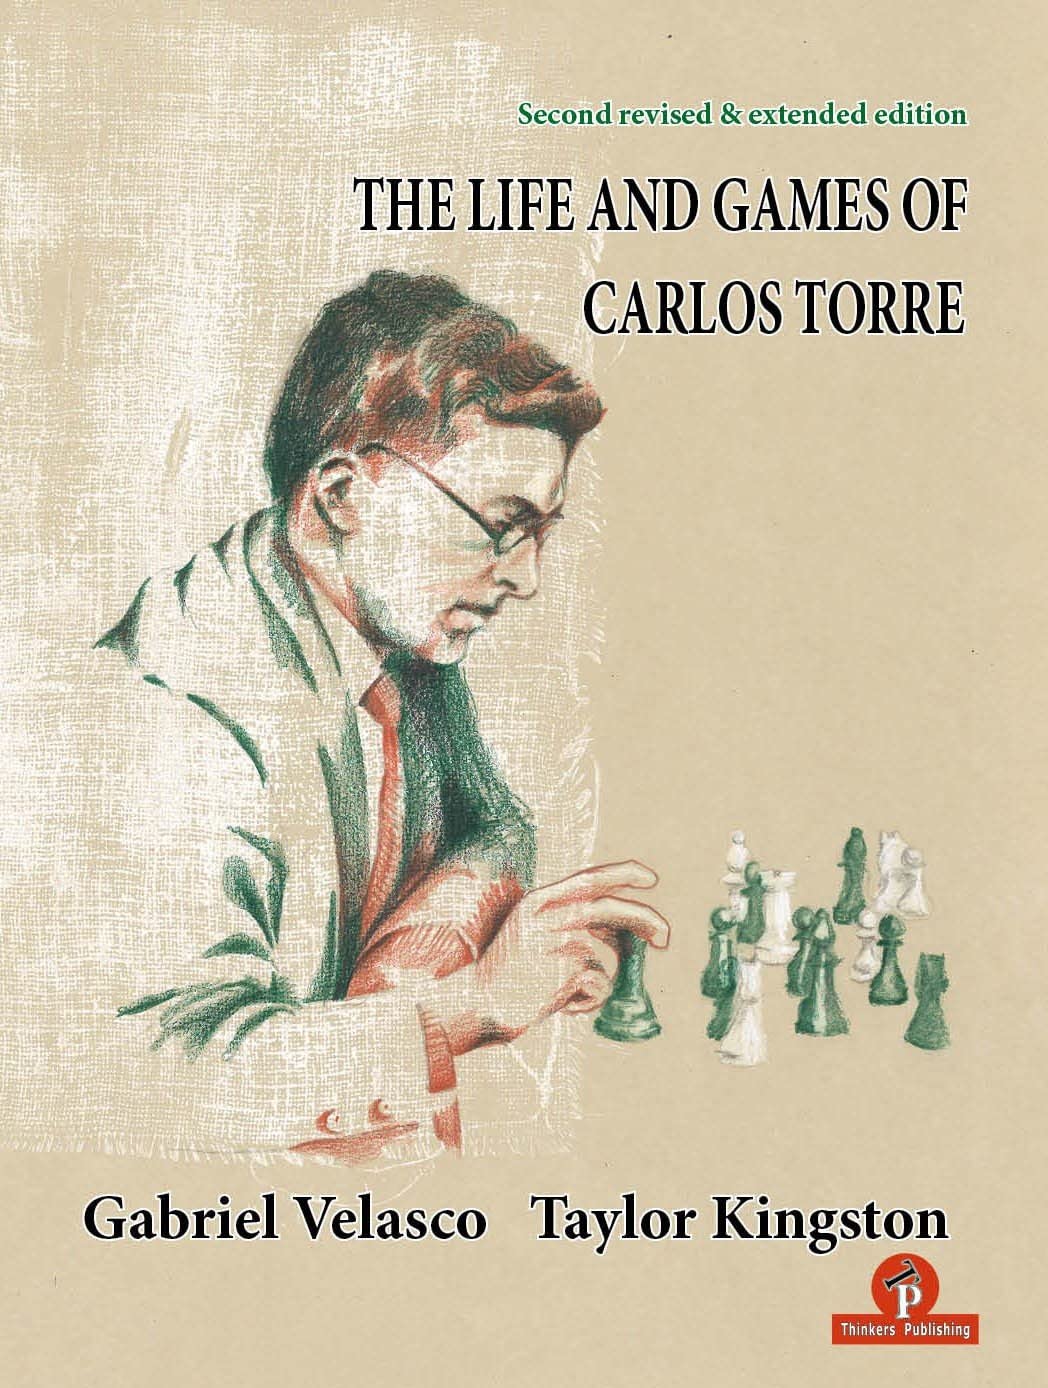 The Life and Games of Carlos Torre – 2nd revised and extended edition- Gabriel Velasco & Taylor Kingston, Thinkers Publishing, March 21st 2023, ISBN-13 ‏ : ‎ 978-9464201765